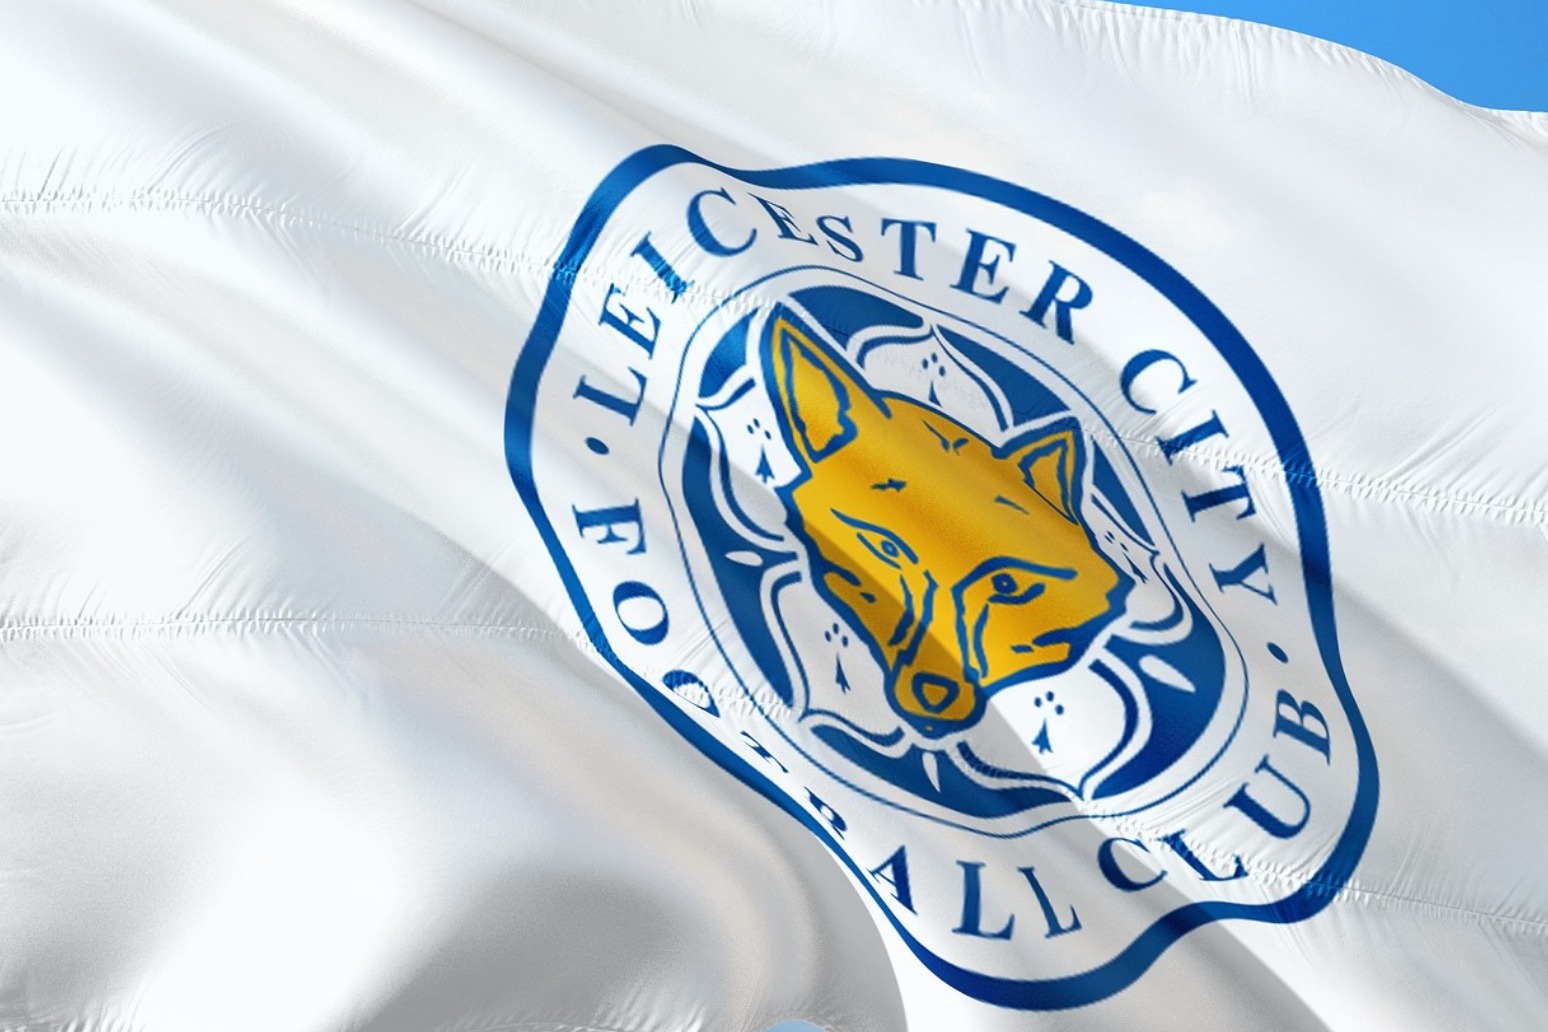 Leicester chairman confirmed as one of five dead in helicopter crash 